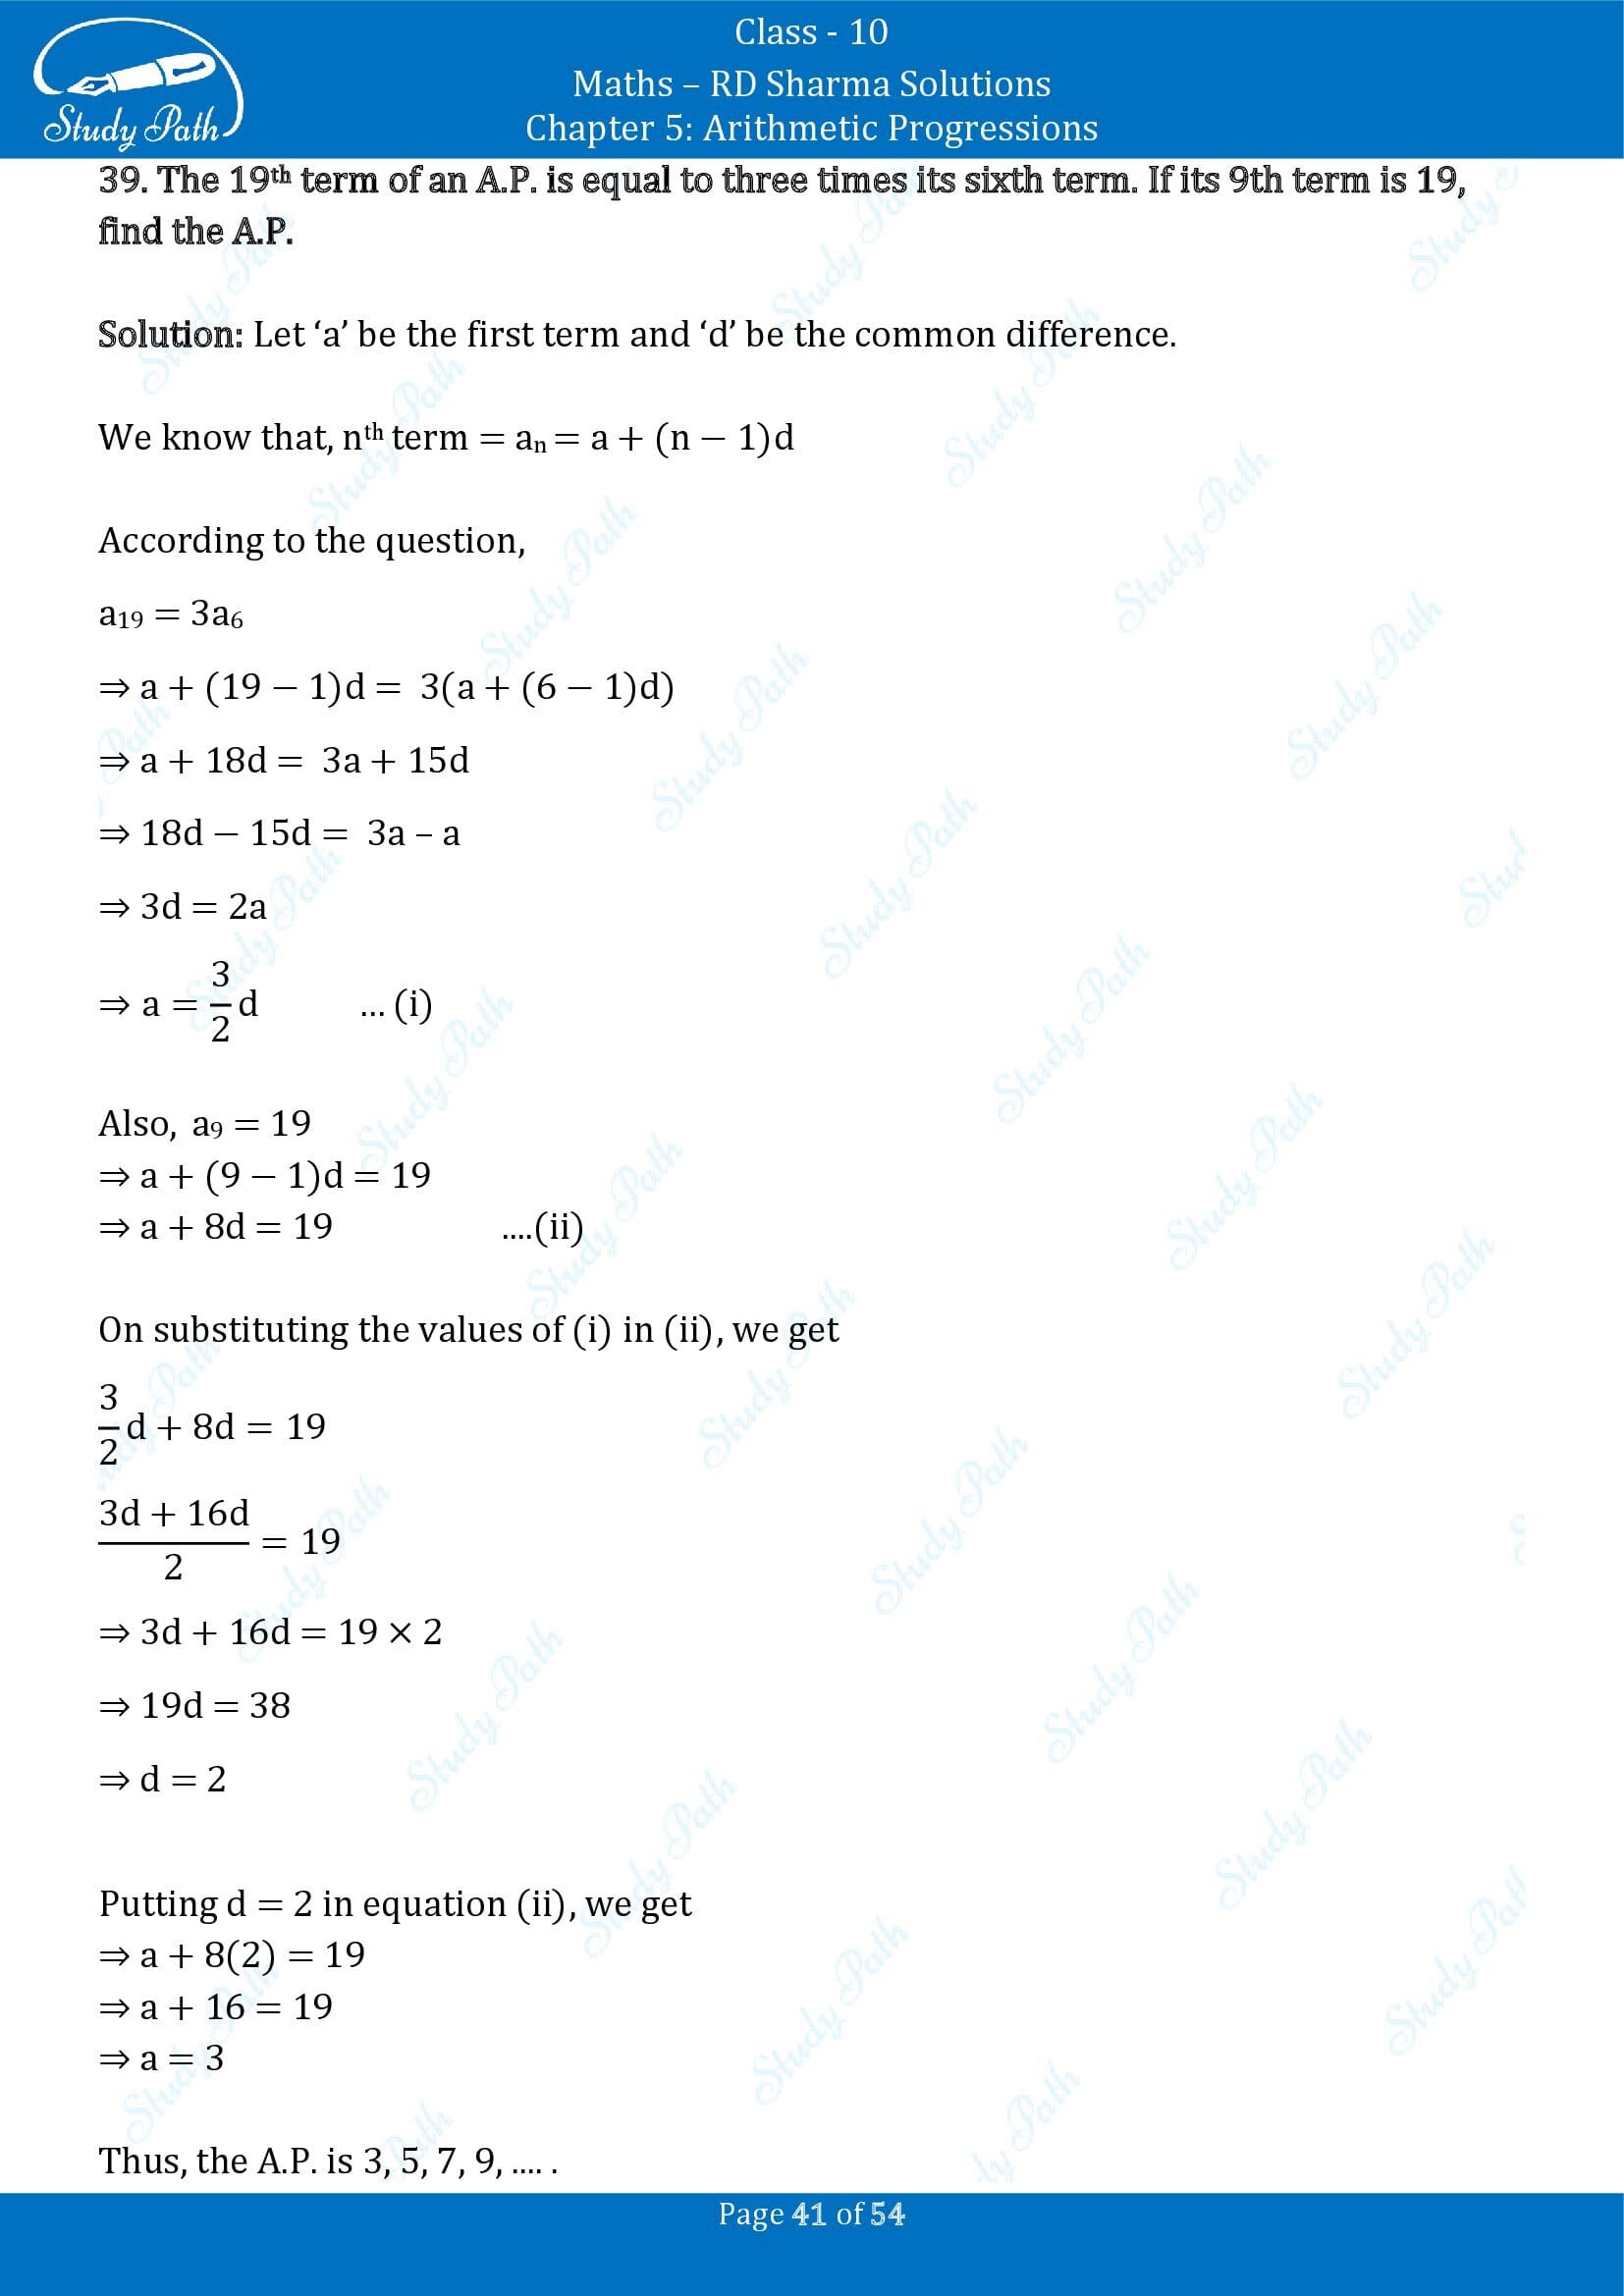 RD Sharma Solutions Class 10 Chapter 5 Arithmetic Progressions Exercise 5.4 00041